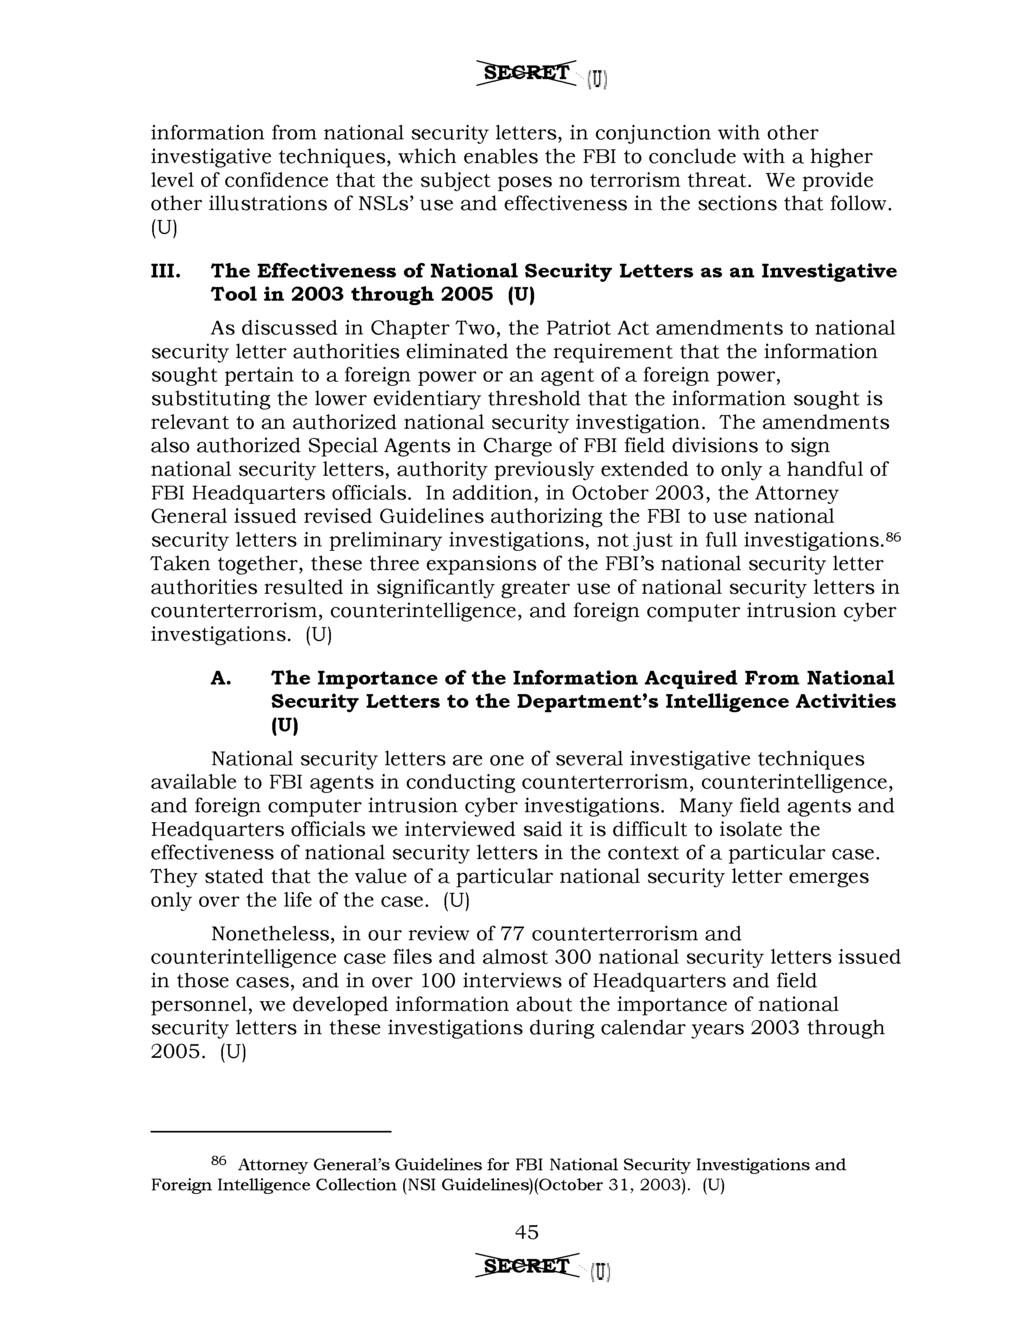 ibmo^in) information from national security letters, in conjunction with other investigative techniques, which enables the FBI to conclude with a higher level of confidence that the subject poses no